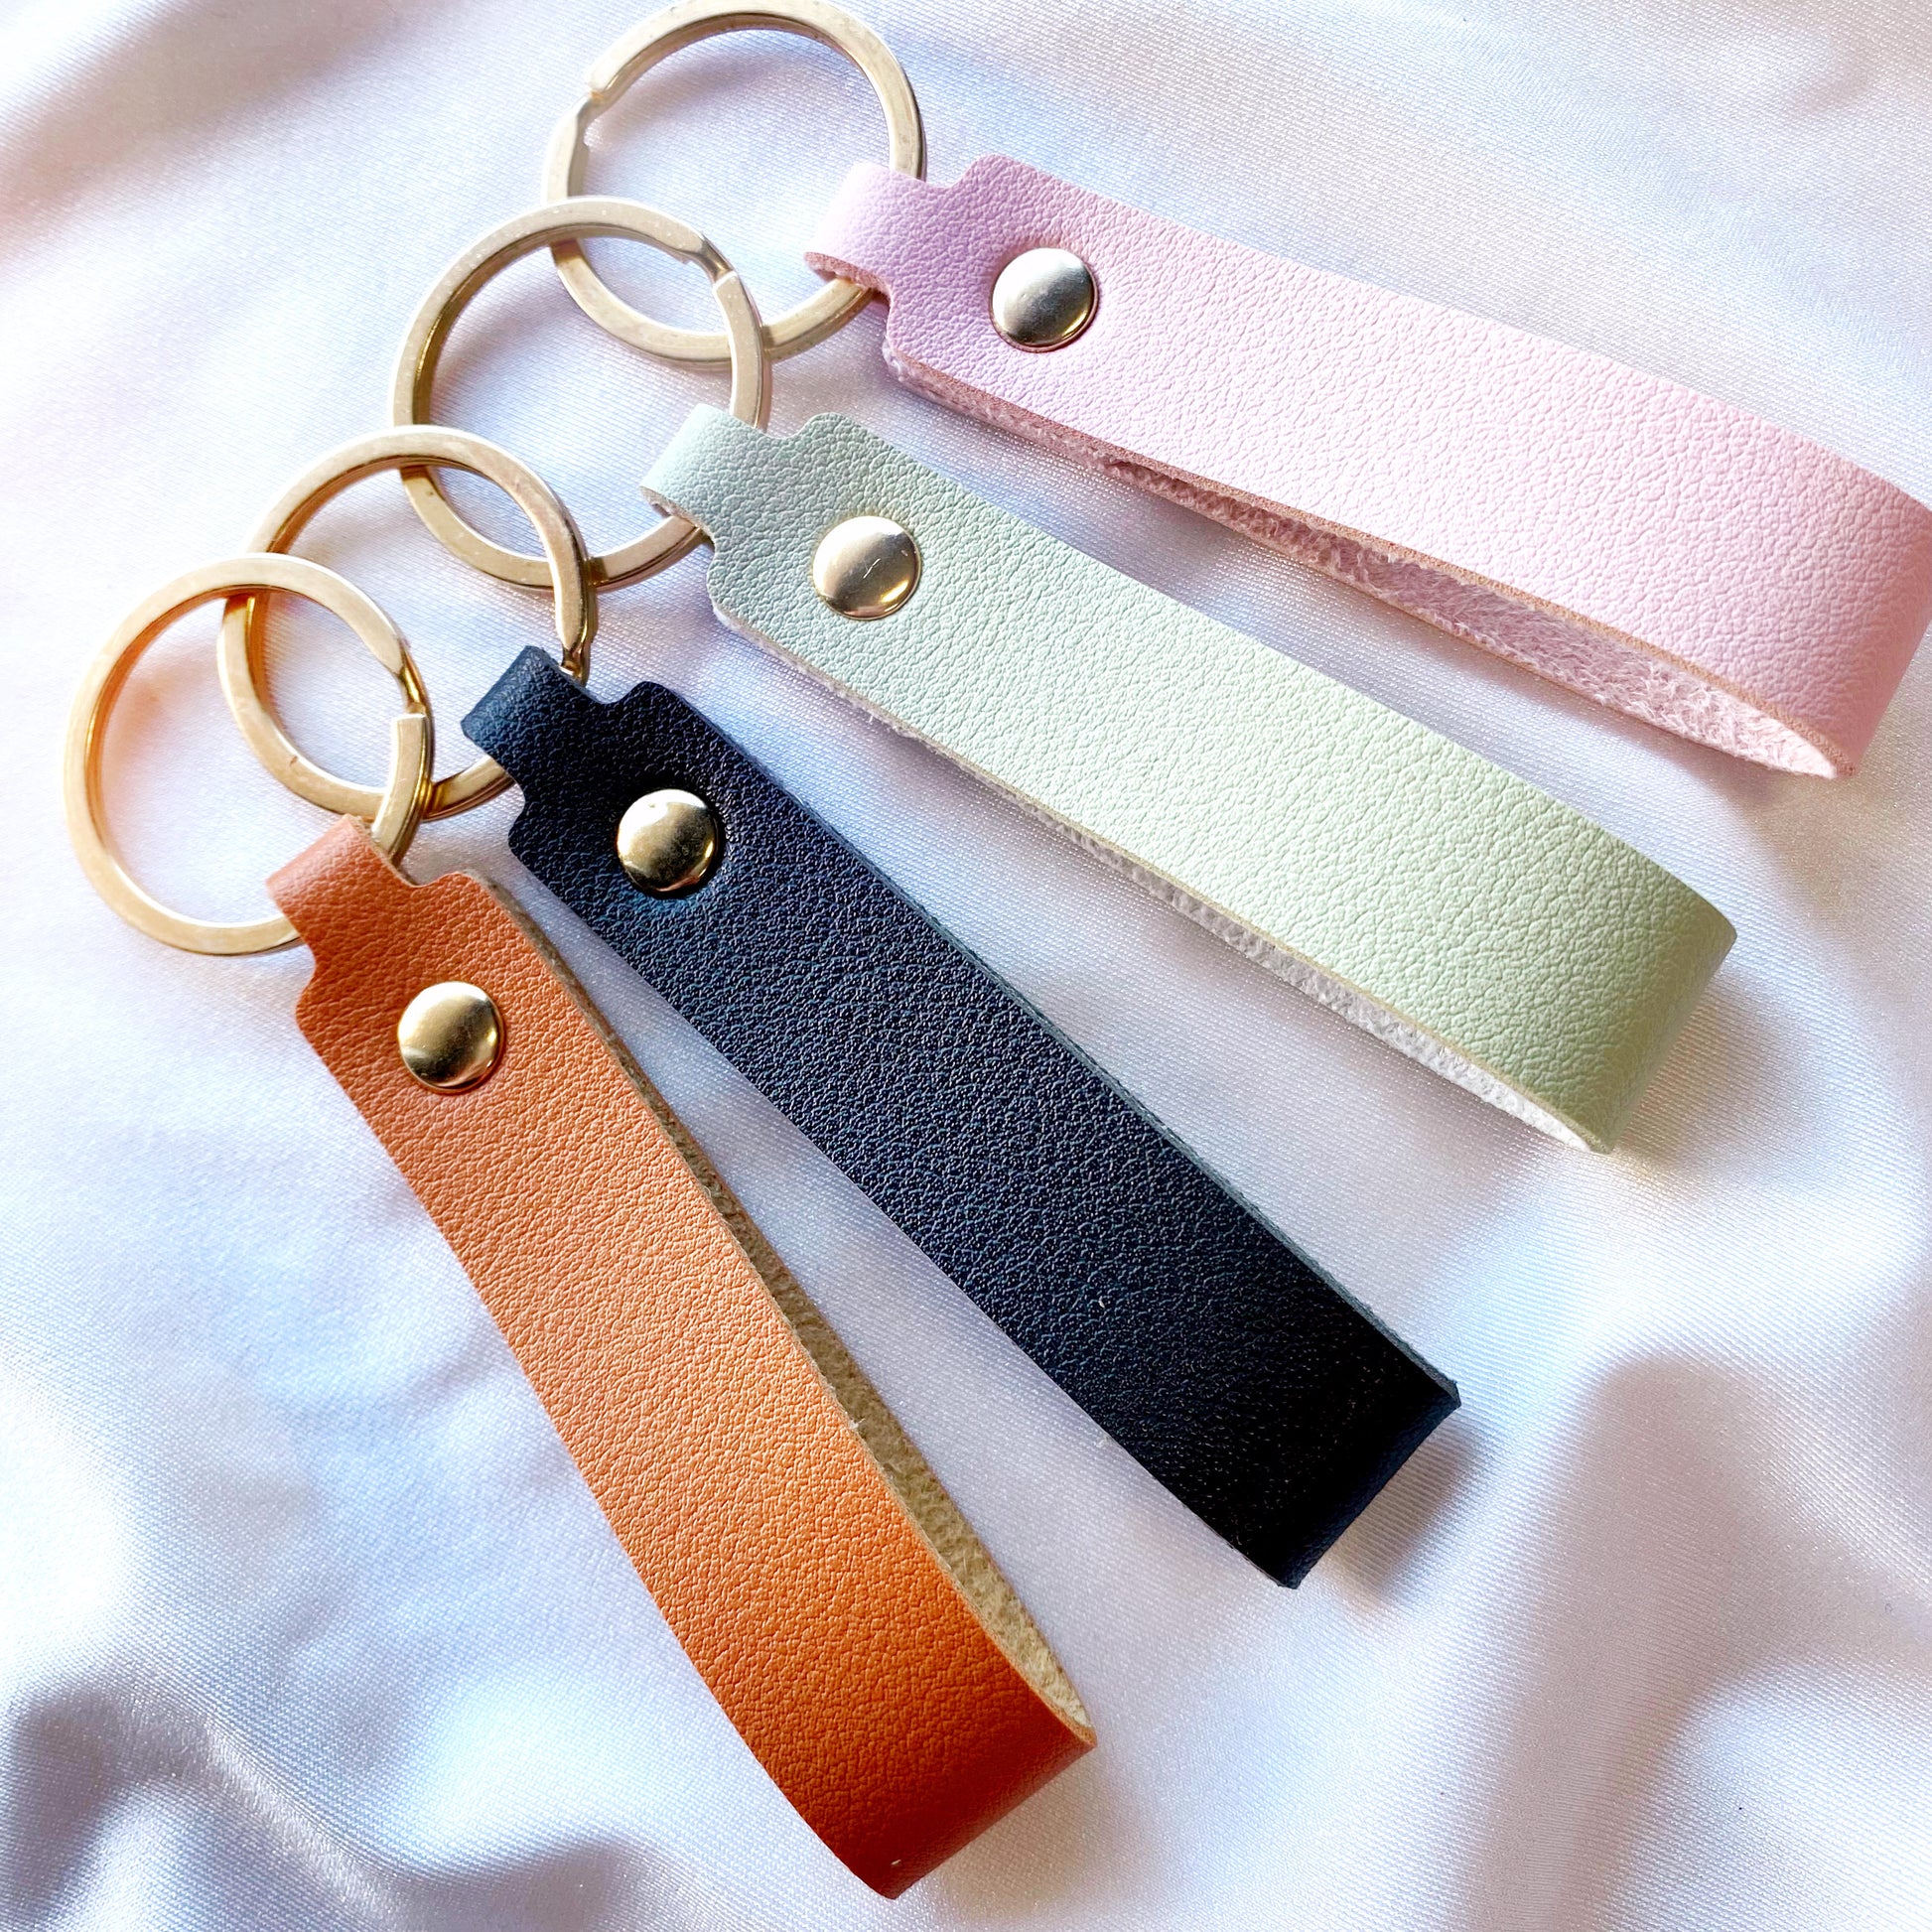 chose from black, brown, pink, or sage green leather